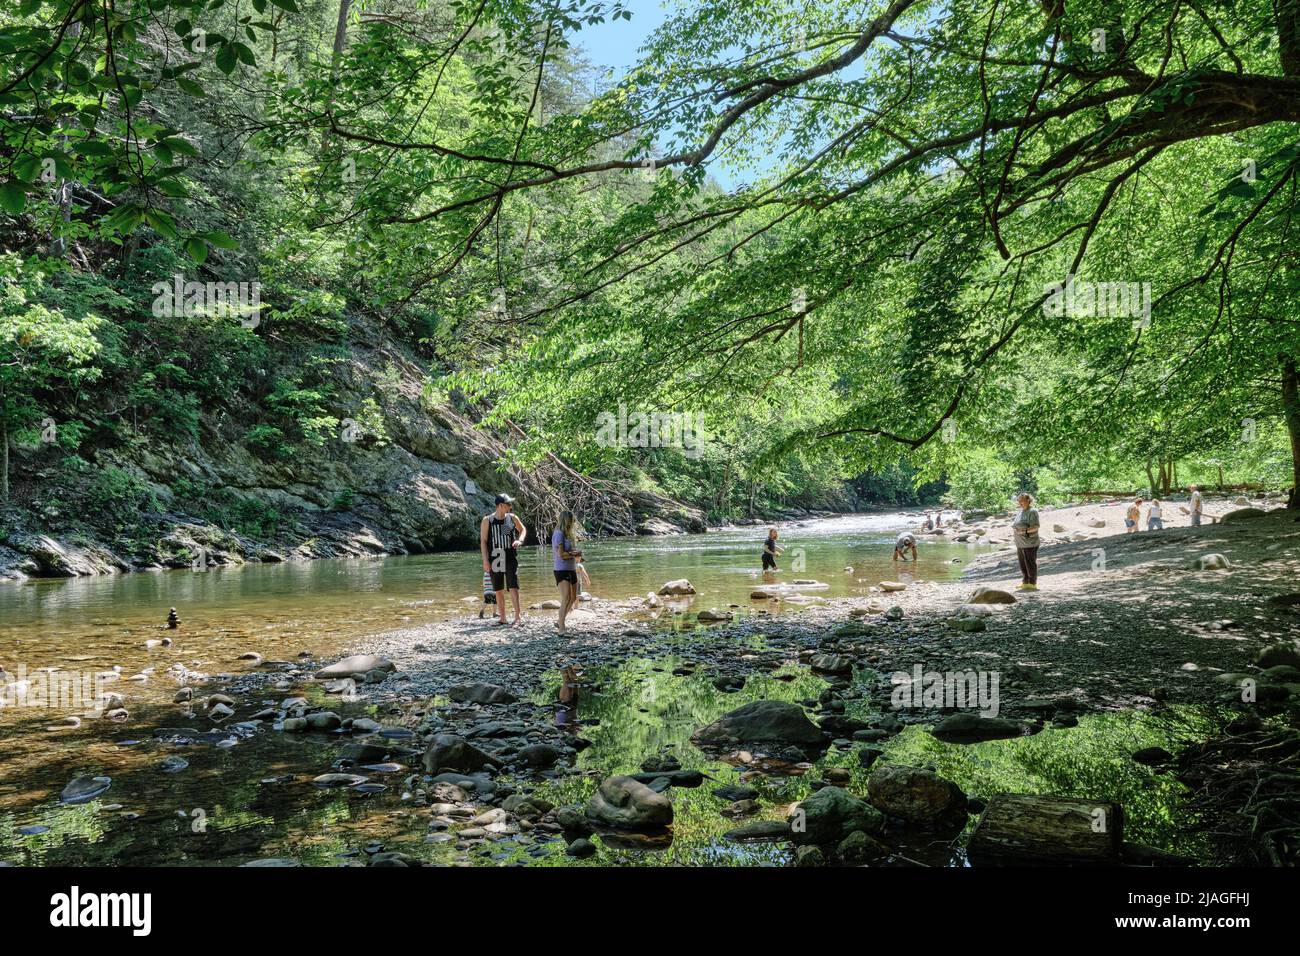 People, families and children enjoying the Little River near Cades Cove Tennessee, USA. Stock Photo